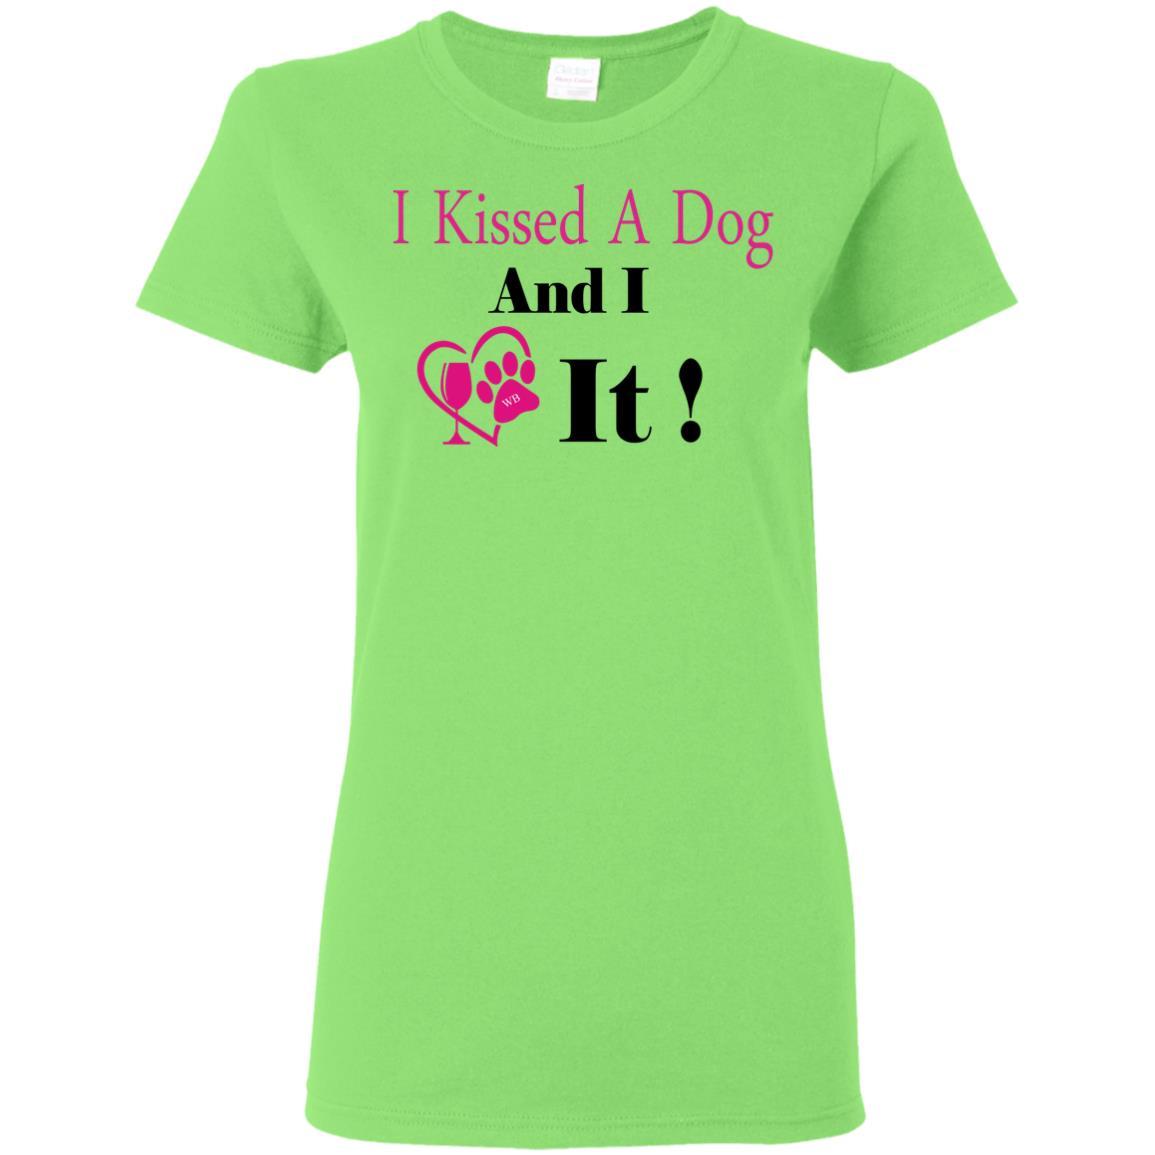 T-Shirts Lime / S WineyBitches.co "I Kissed A Dog And I Loved It:" Ladies' 5.3 oz. T-Shirt WineyBitchesCo